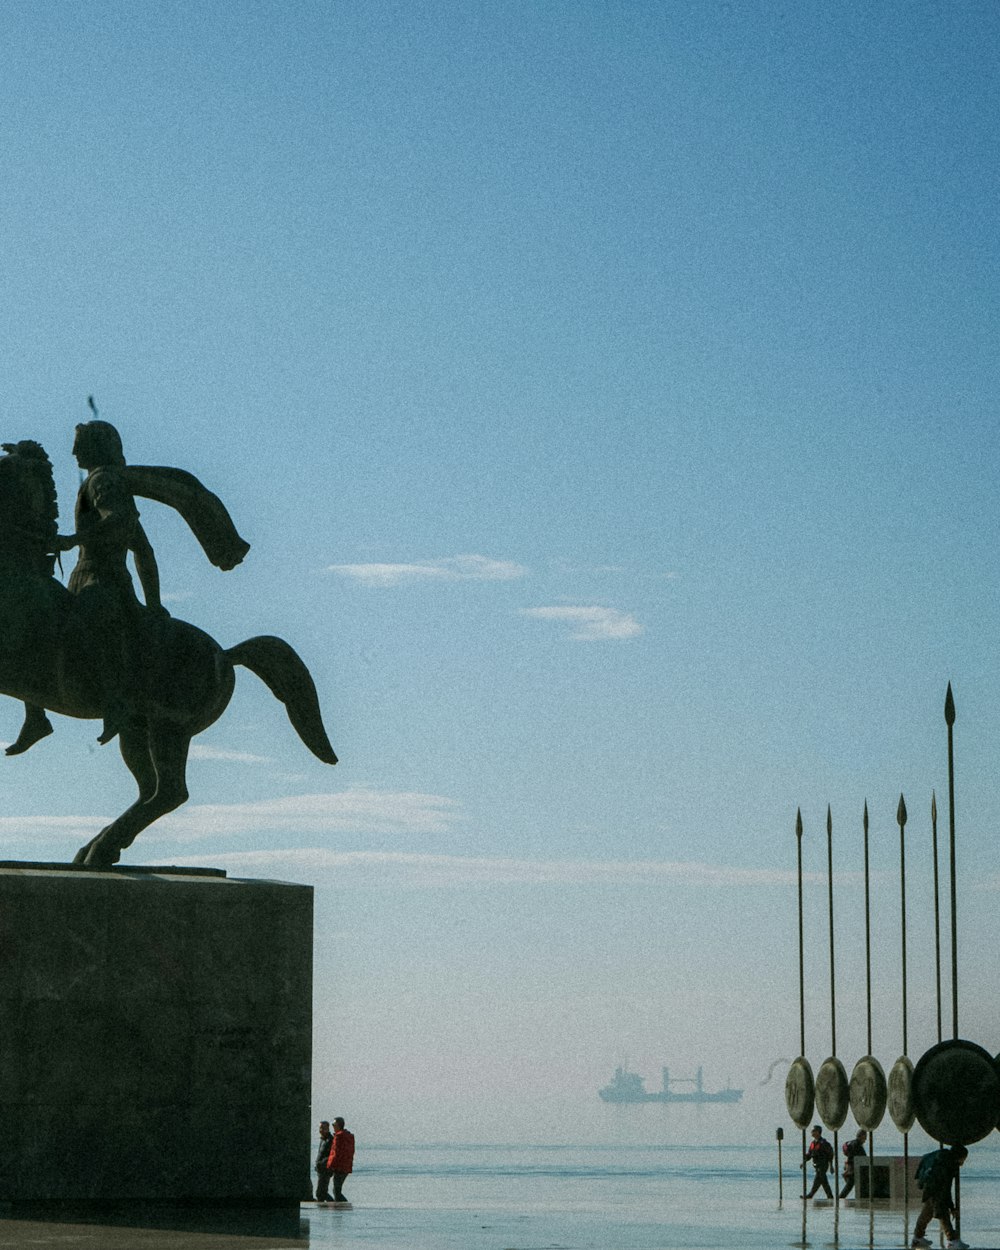 a statue of a man riding a horse next to a body of water